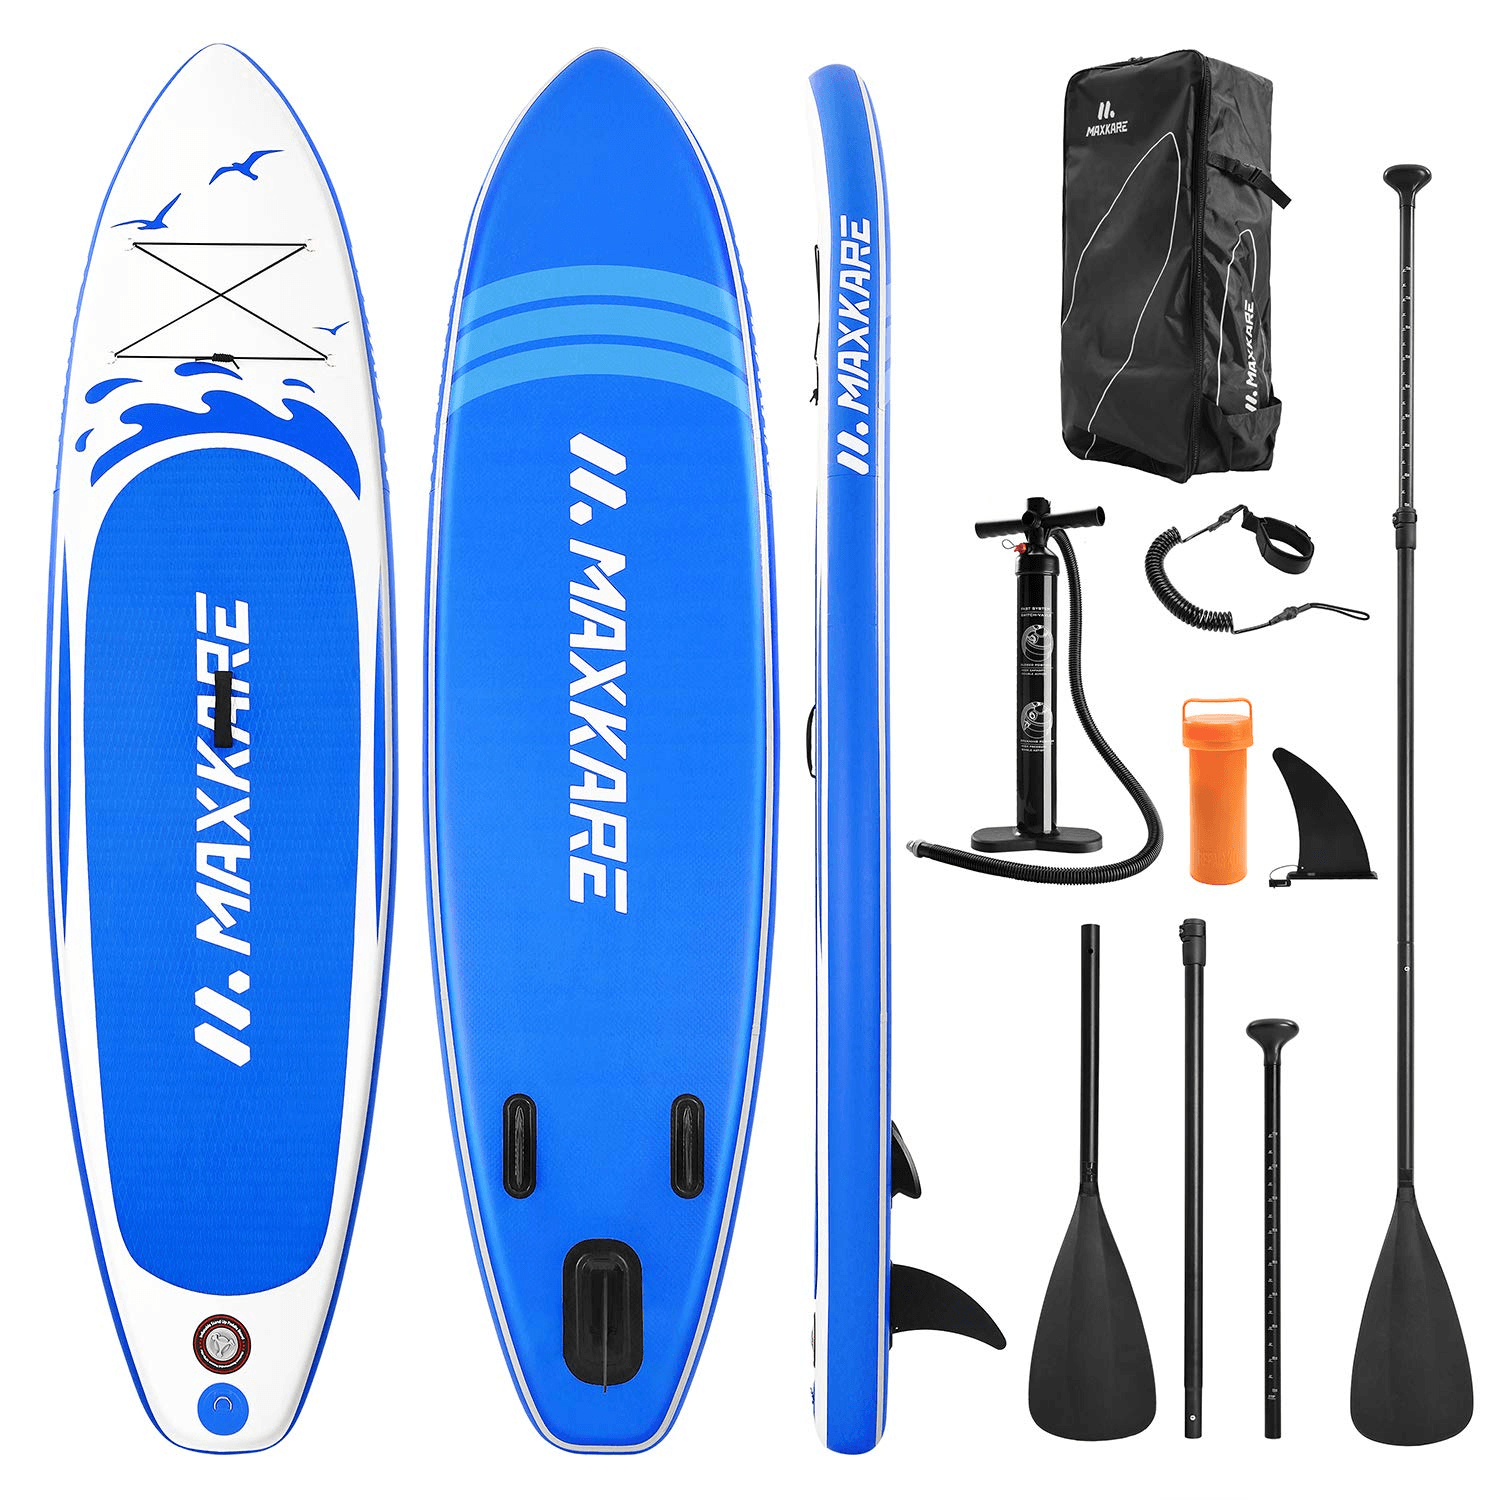 MaxKare Paddle Board Inflatable Stand Board Non-Slip Up Paddle – MAXKARE